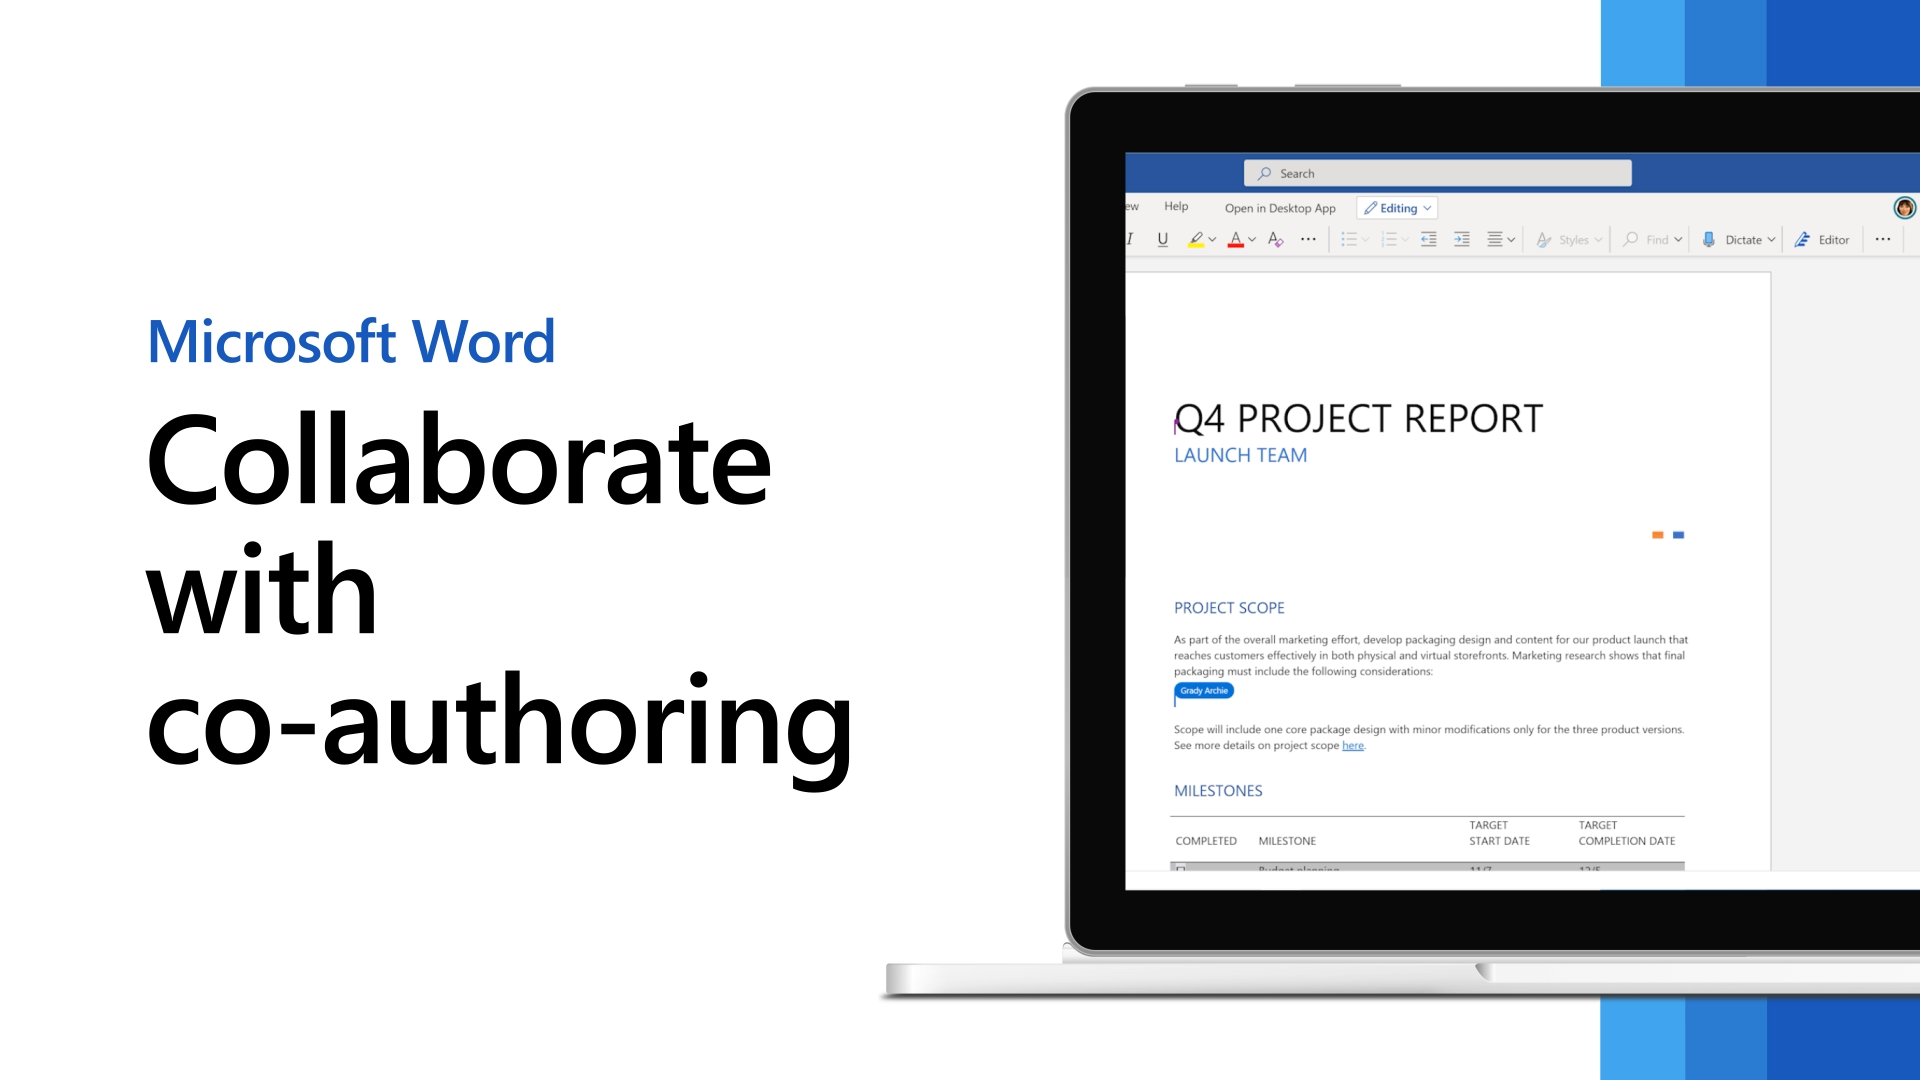 Microsoft Word 365: Discover advanced features